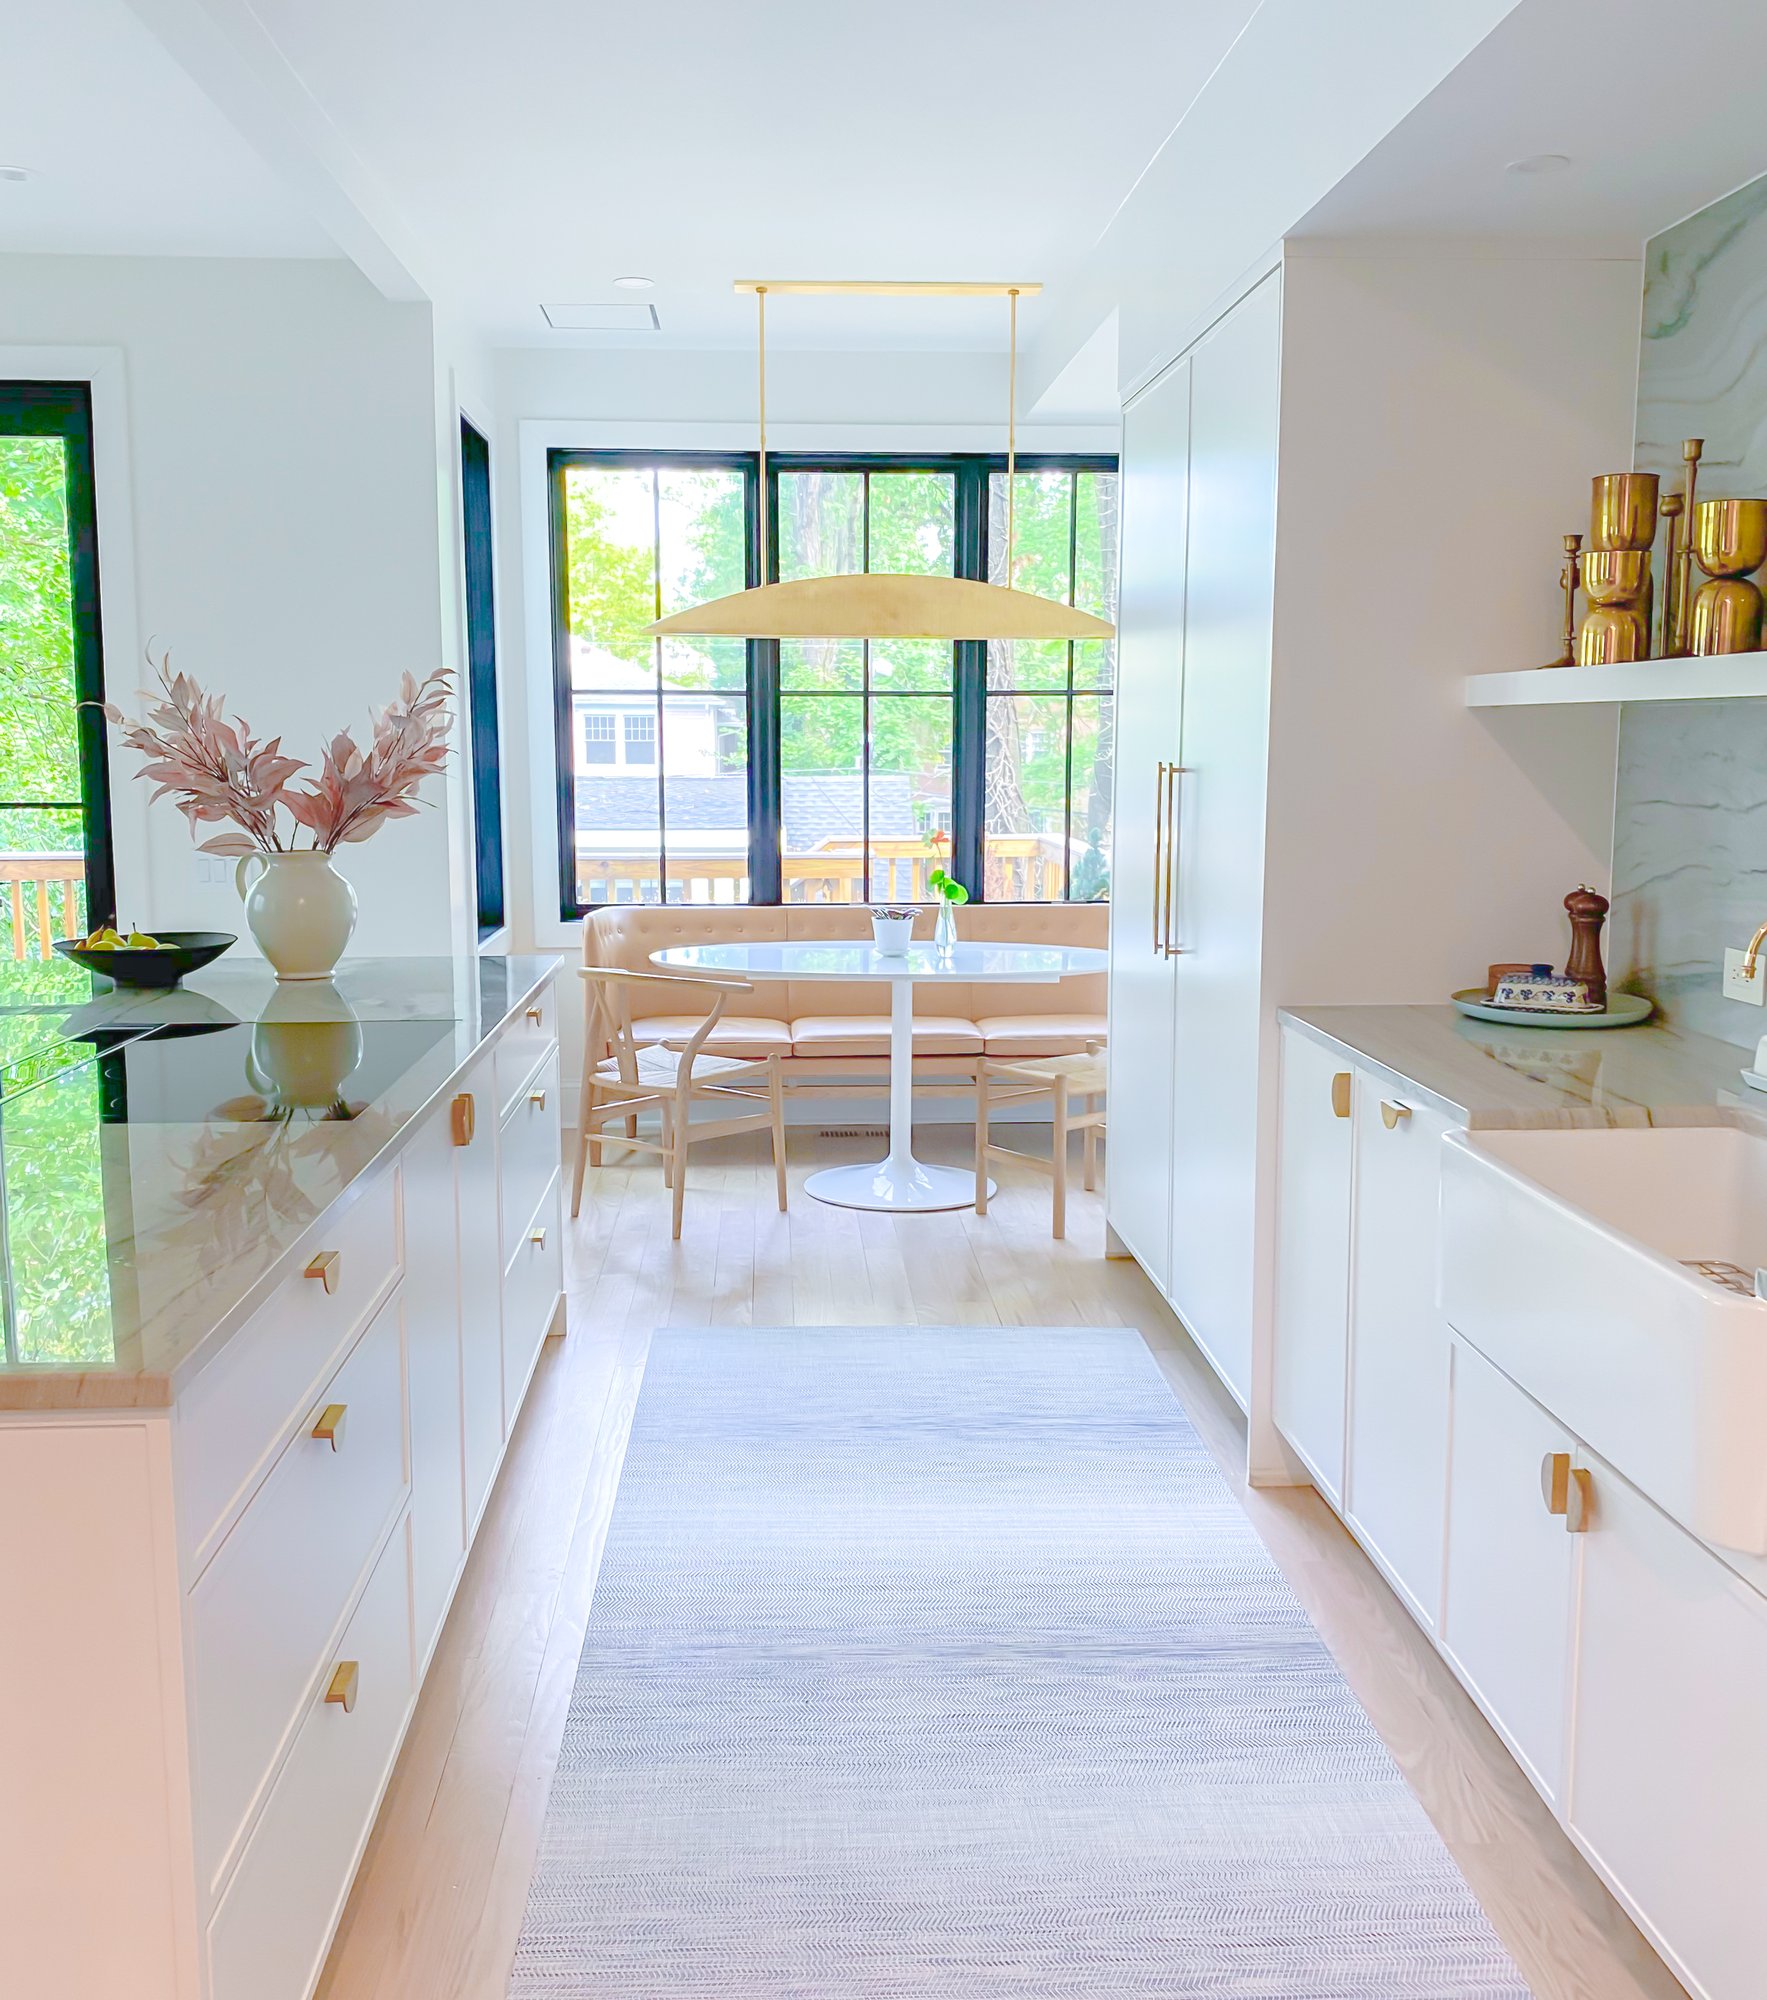 Pure white kitchen walkway with white polished floors, white storage spaces with gold accents, and lots of natural light